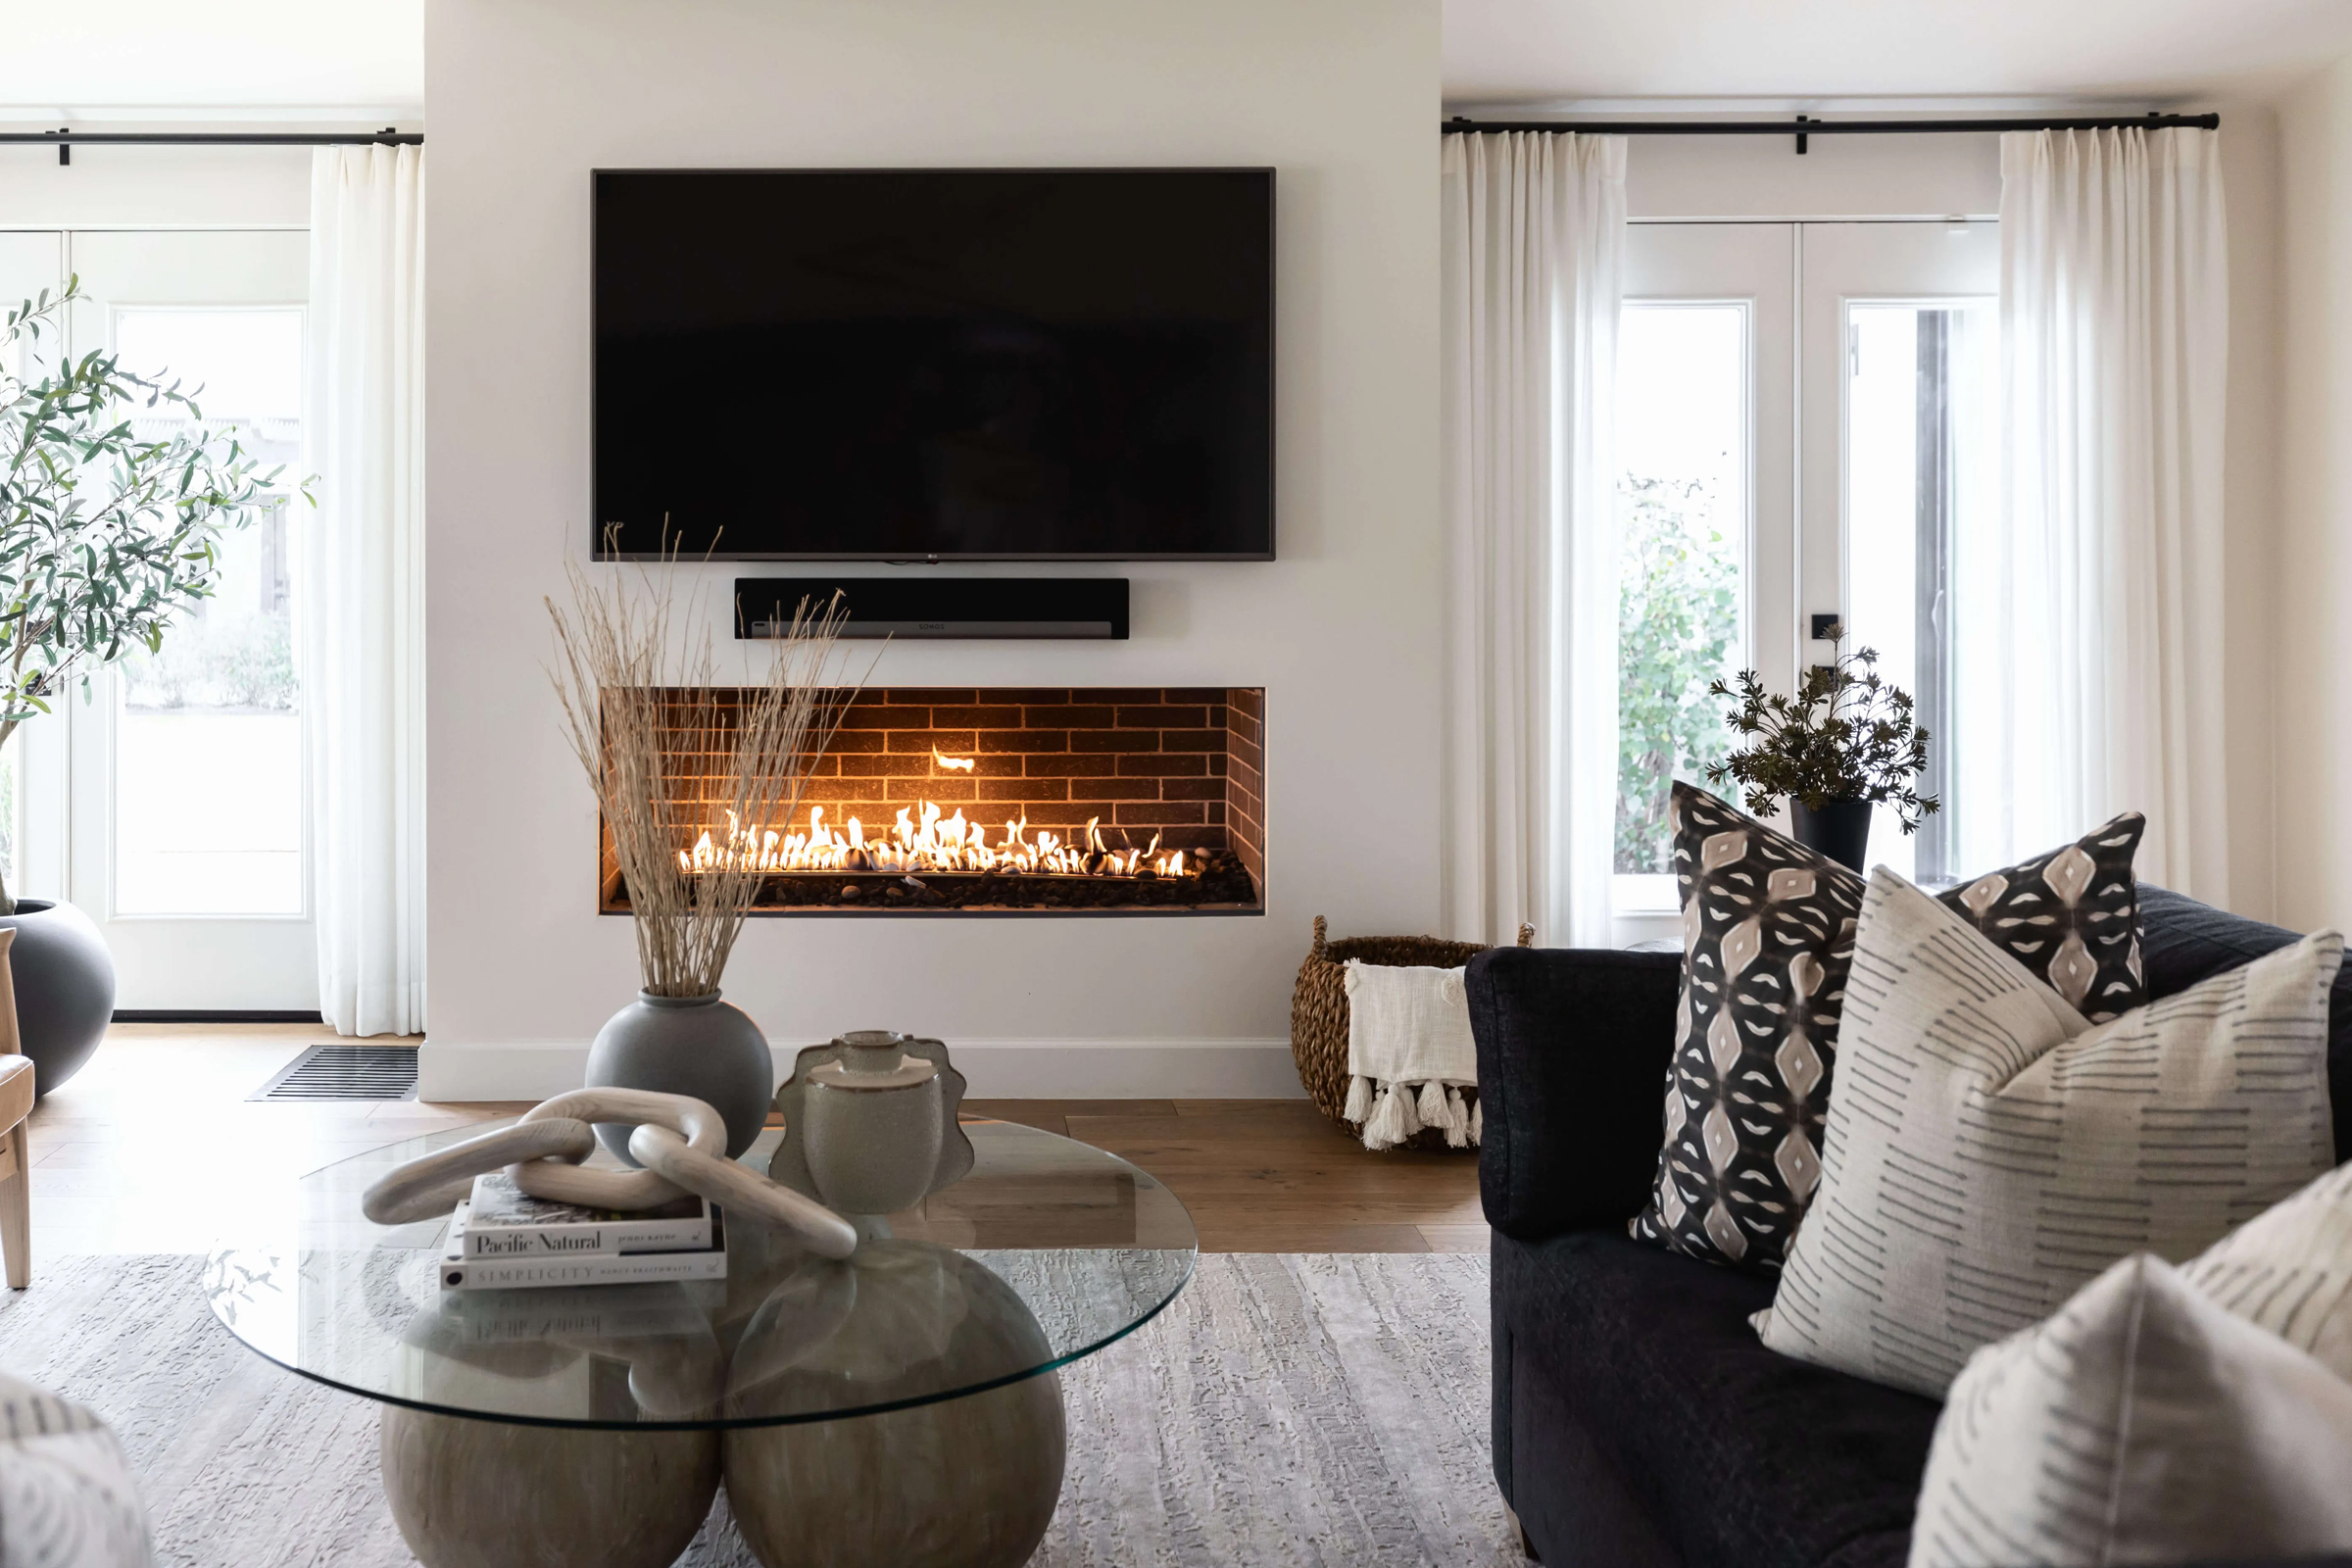 Savvy and Chic Modern Living Room Ideas on a Budget to Elevate Your Home